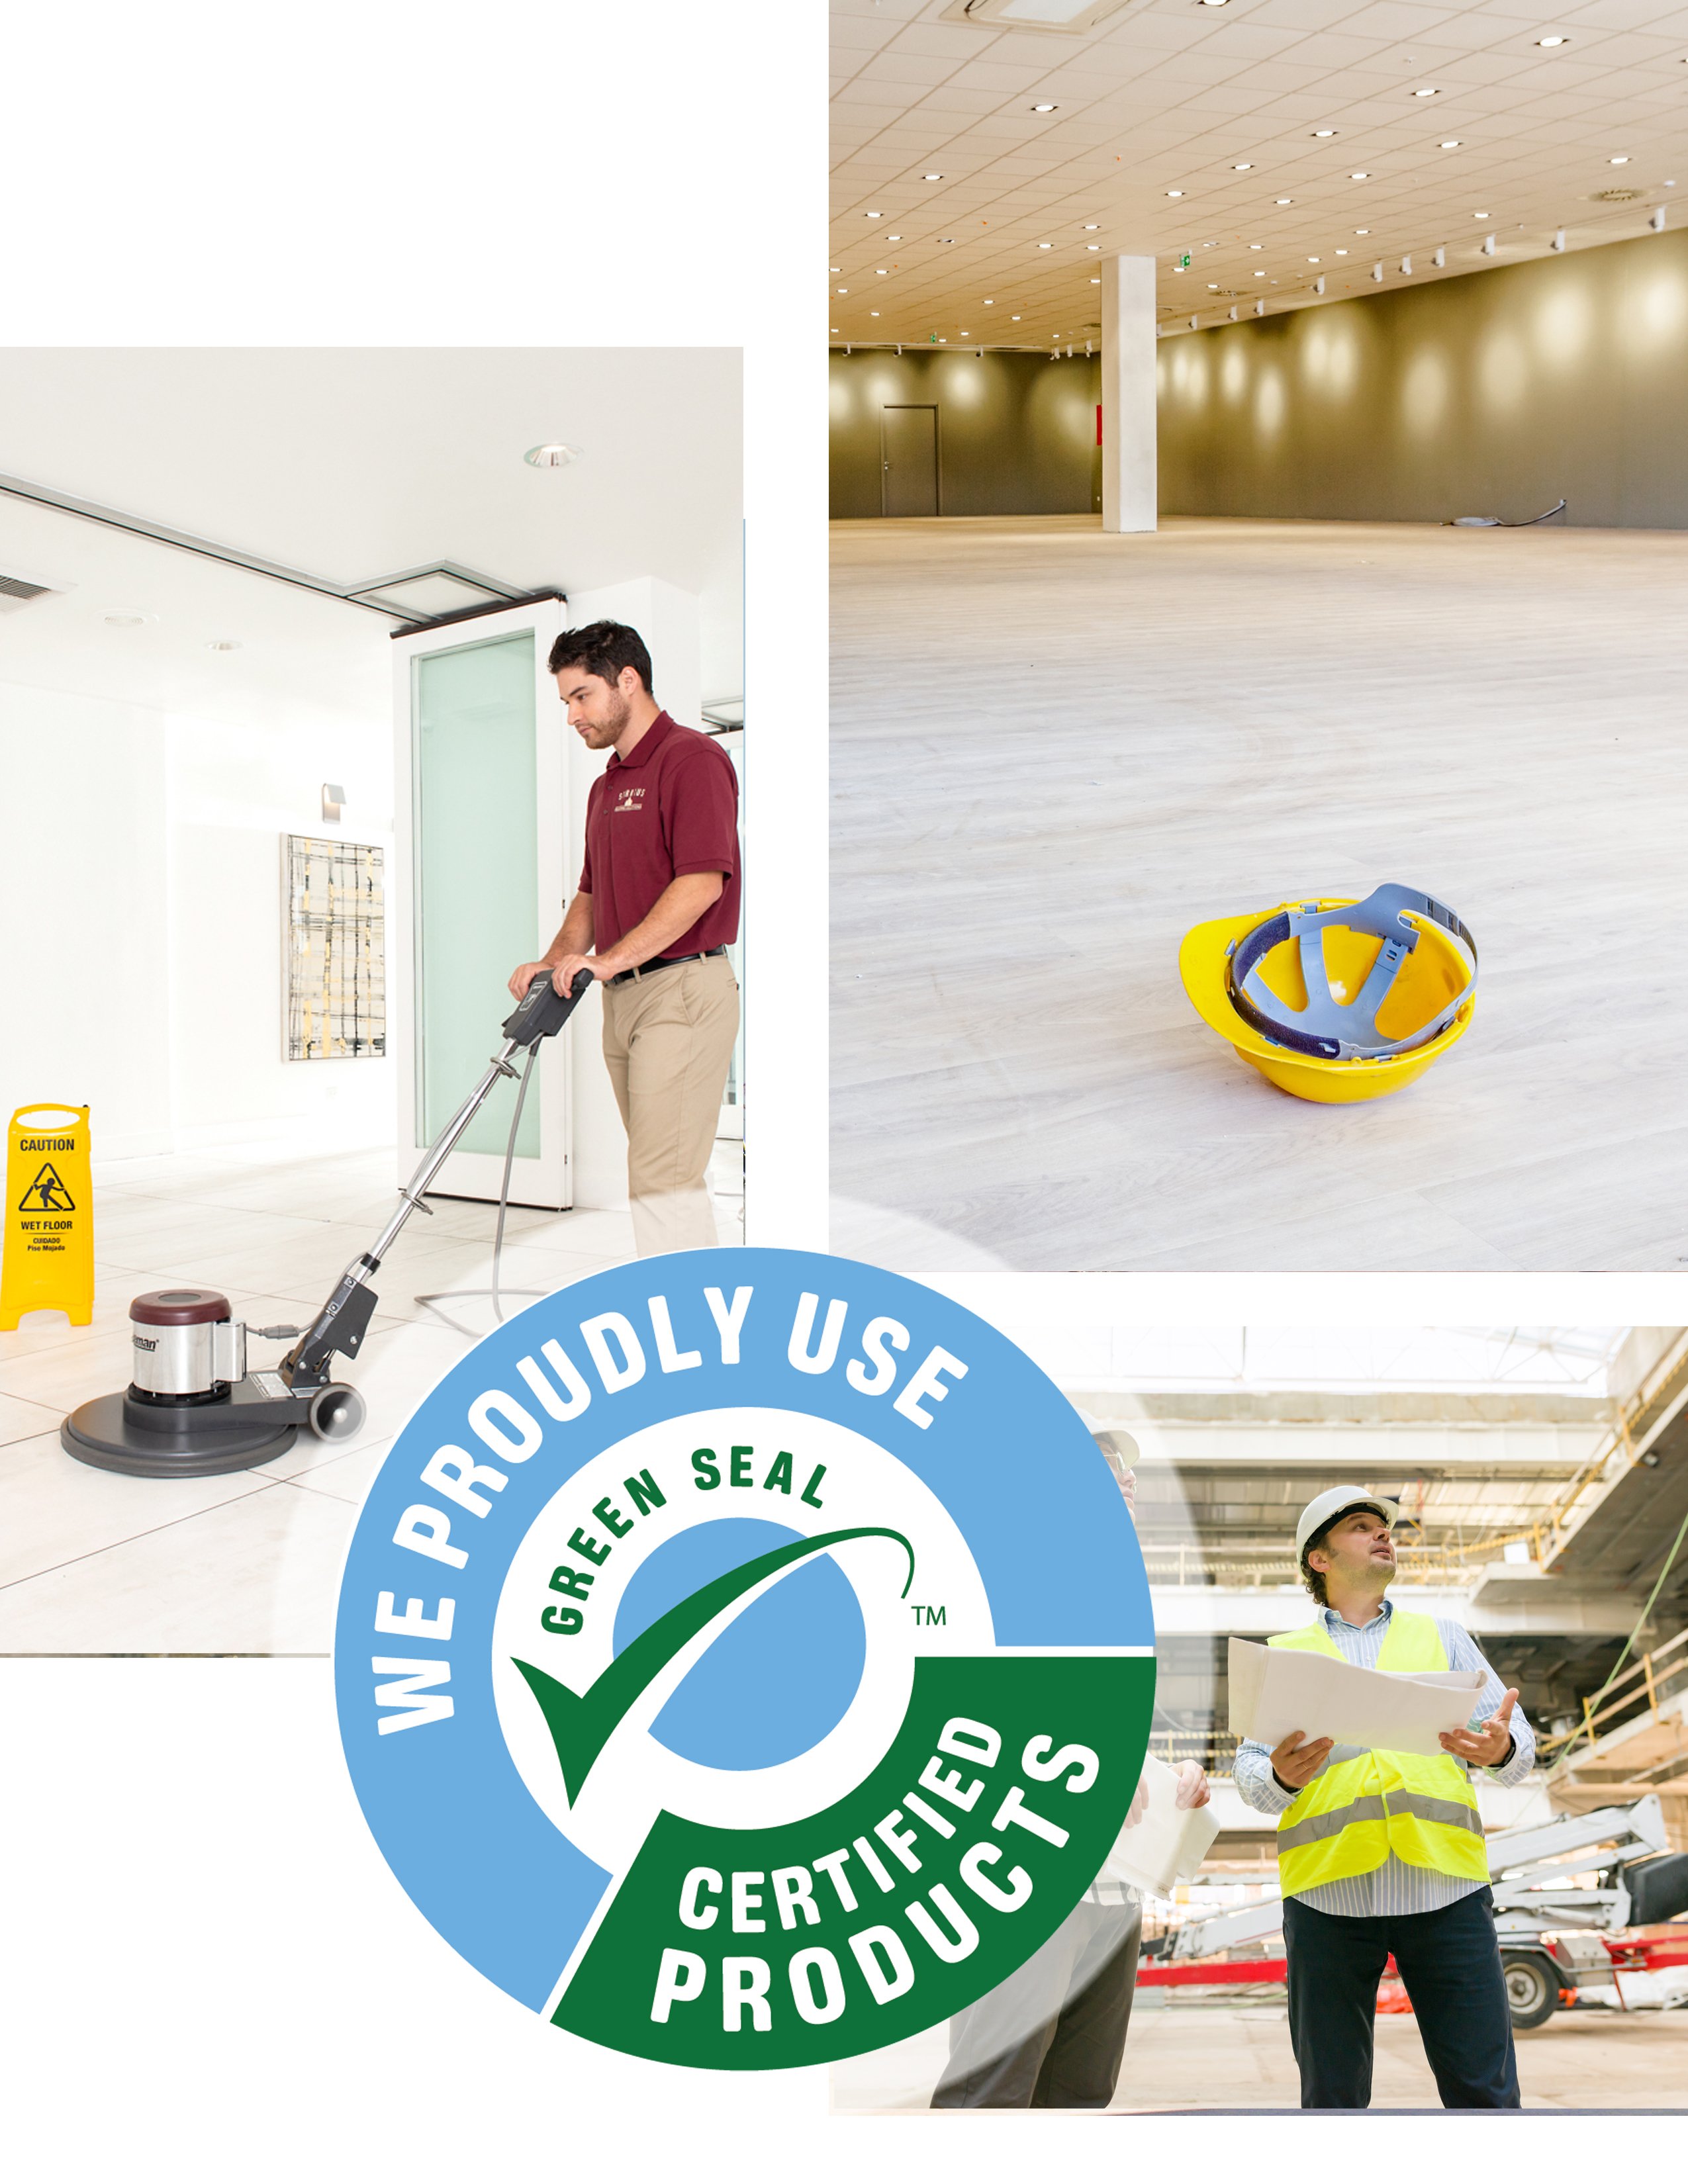 Floor Waxing - Cleaning Company & Maid Service in Las Vegas, NV